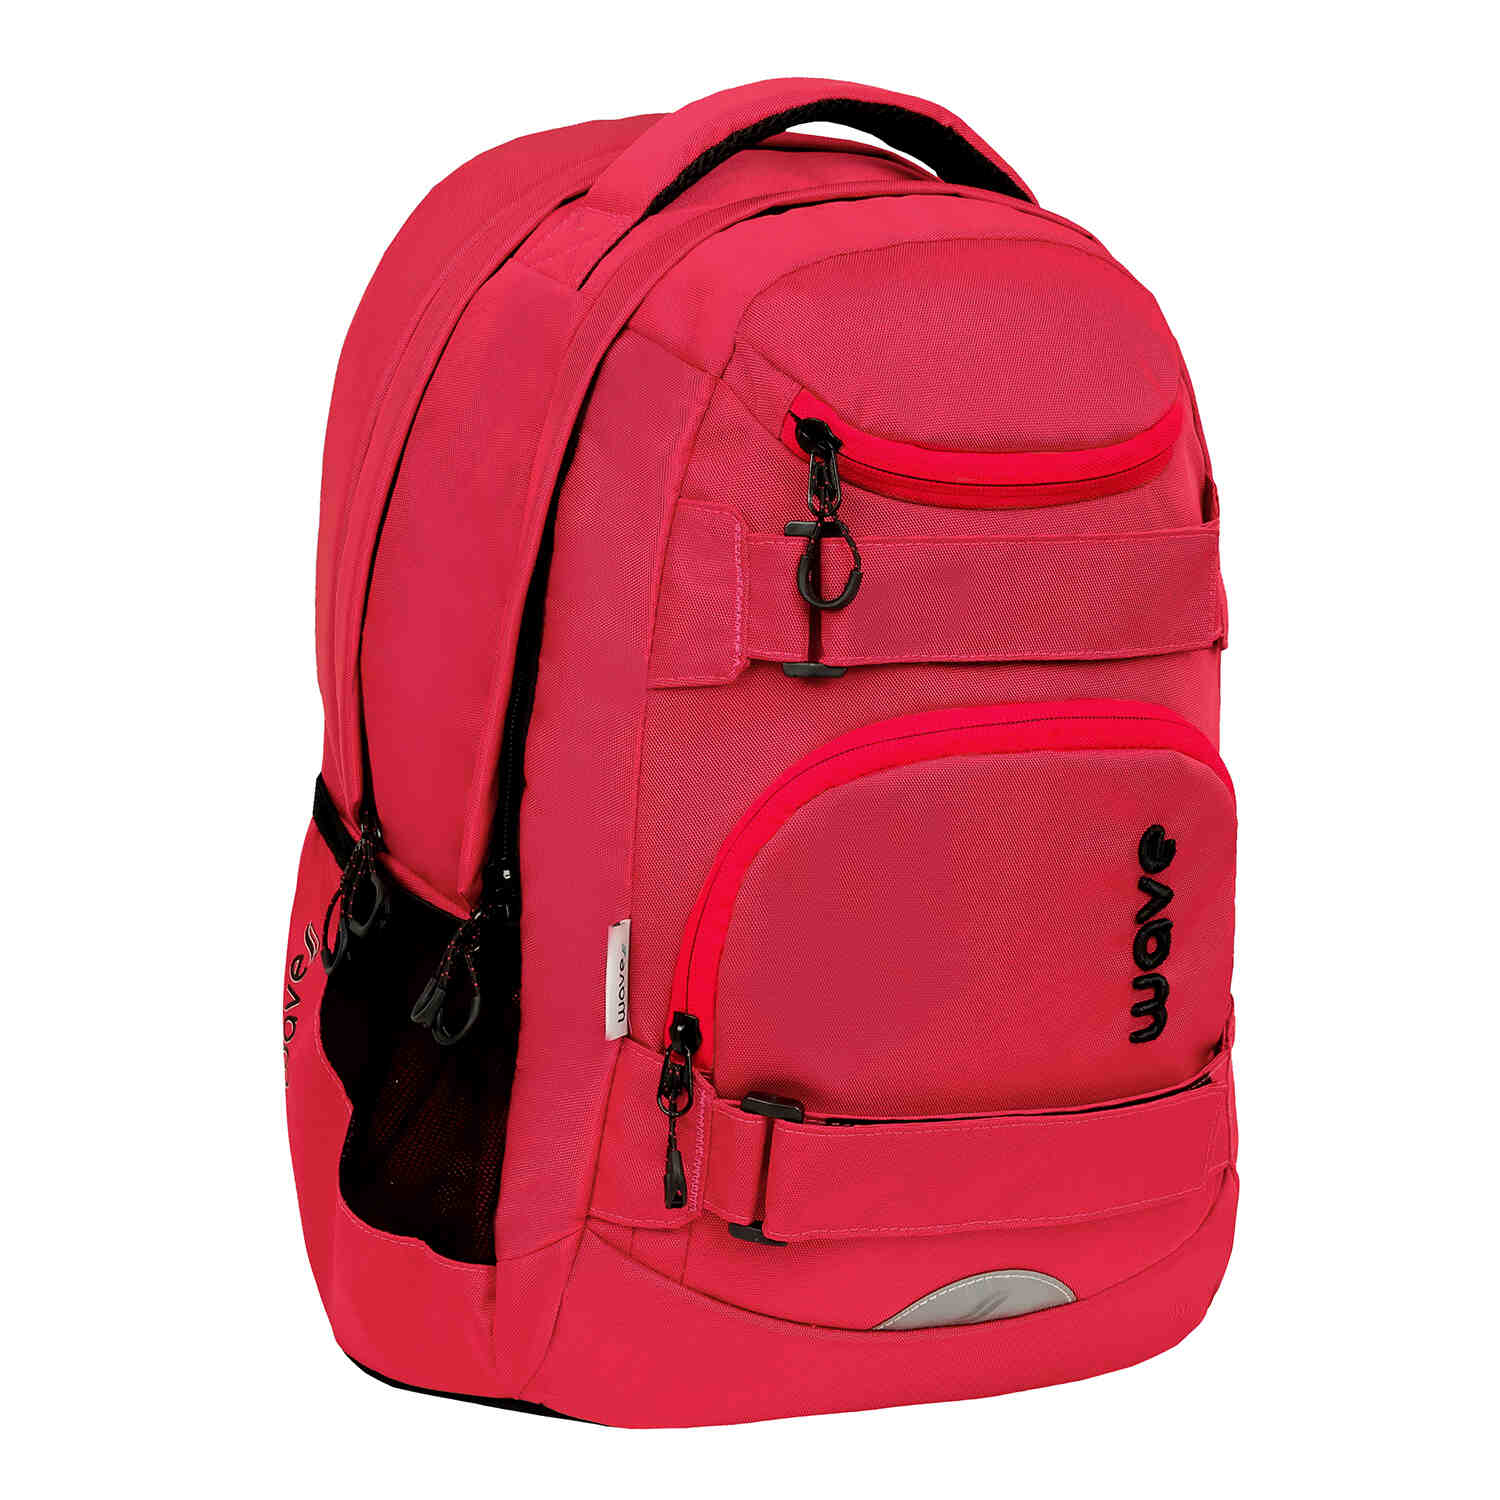 Wave Infinity Move Meteor backpack set 2 Pcs